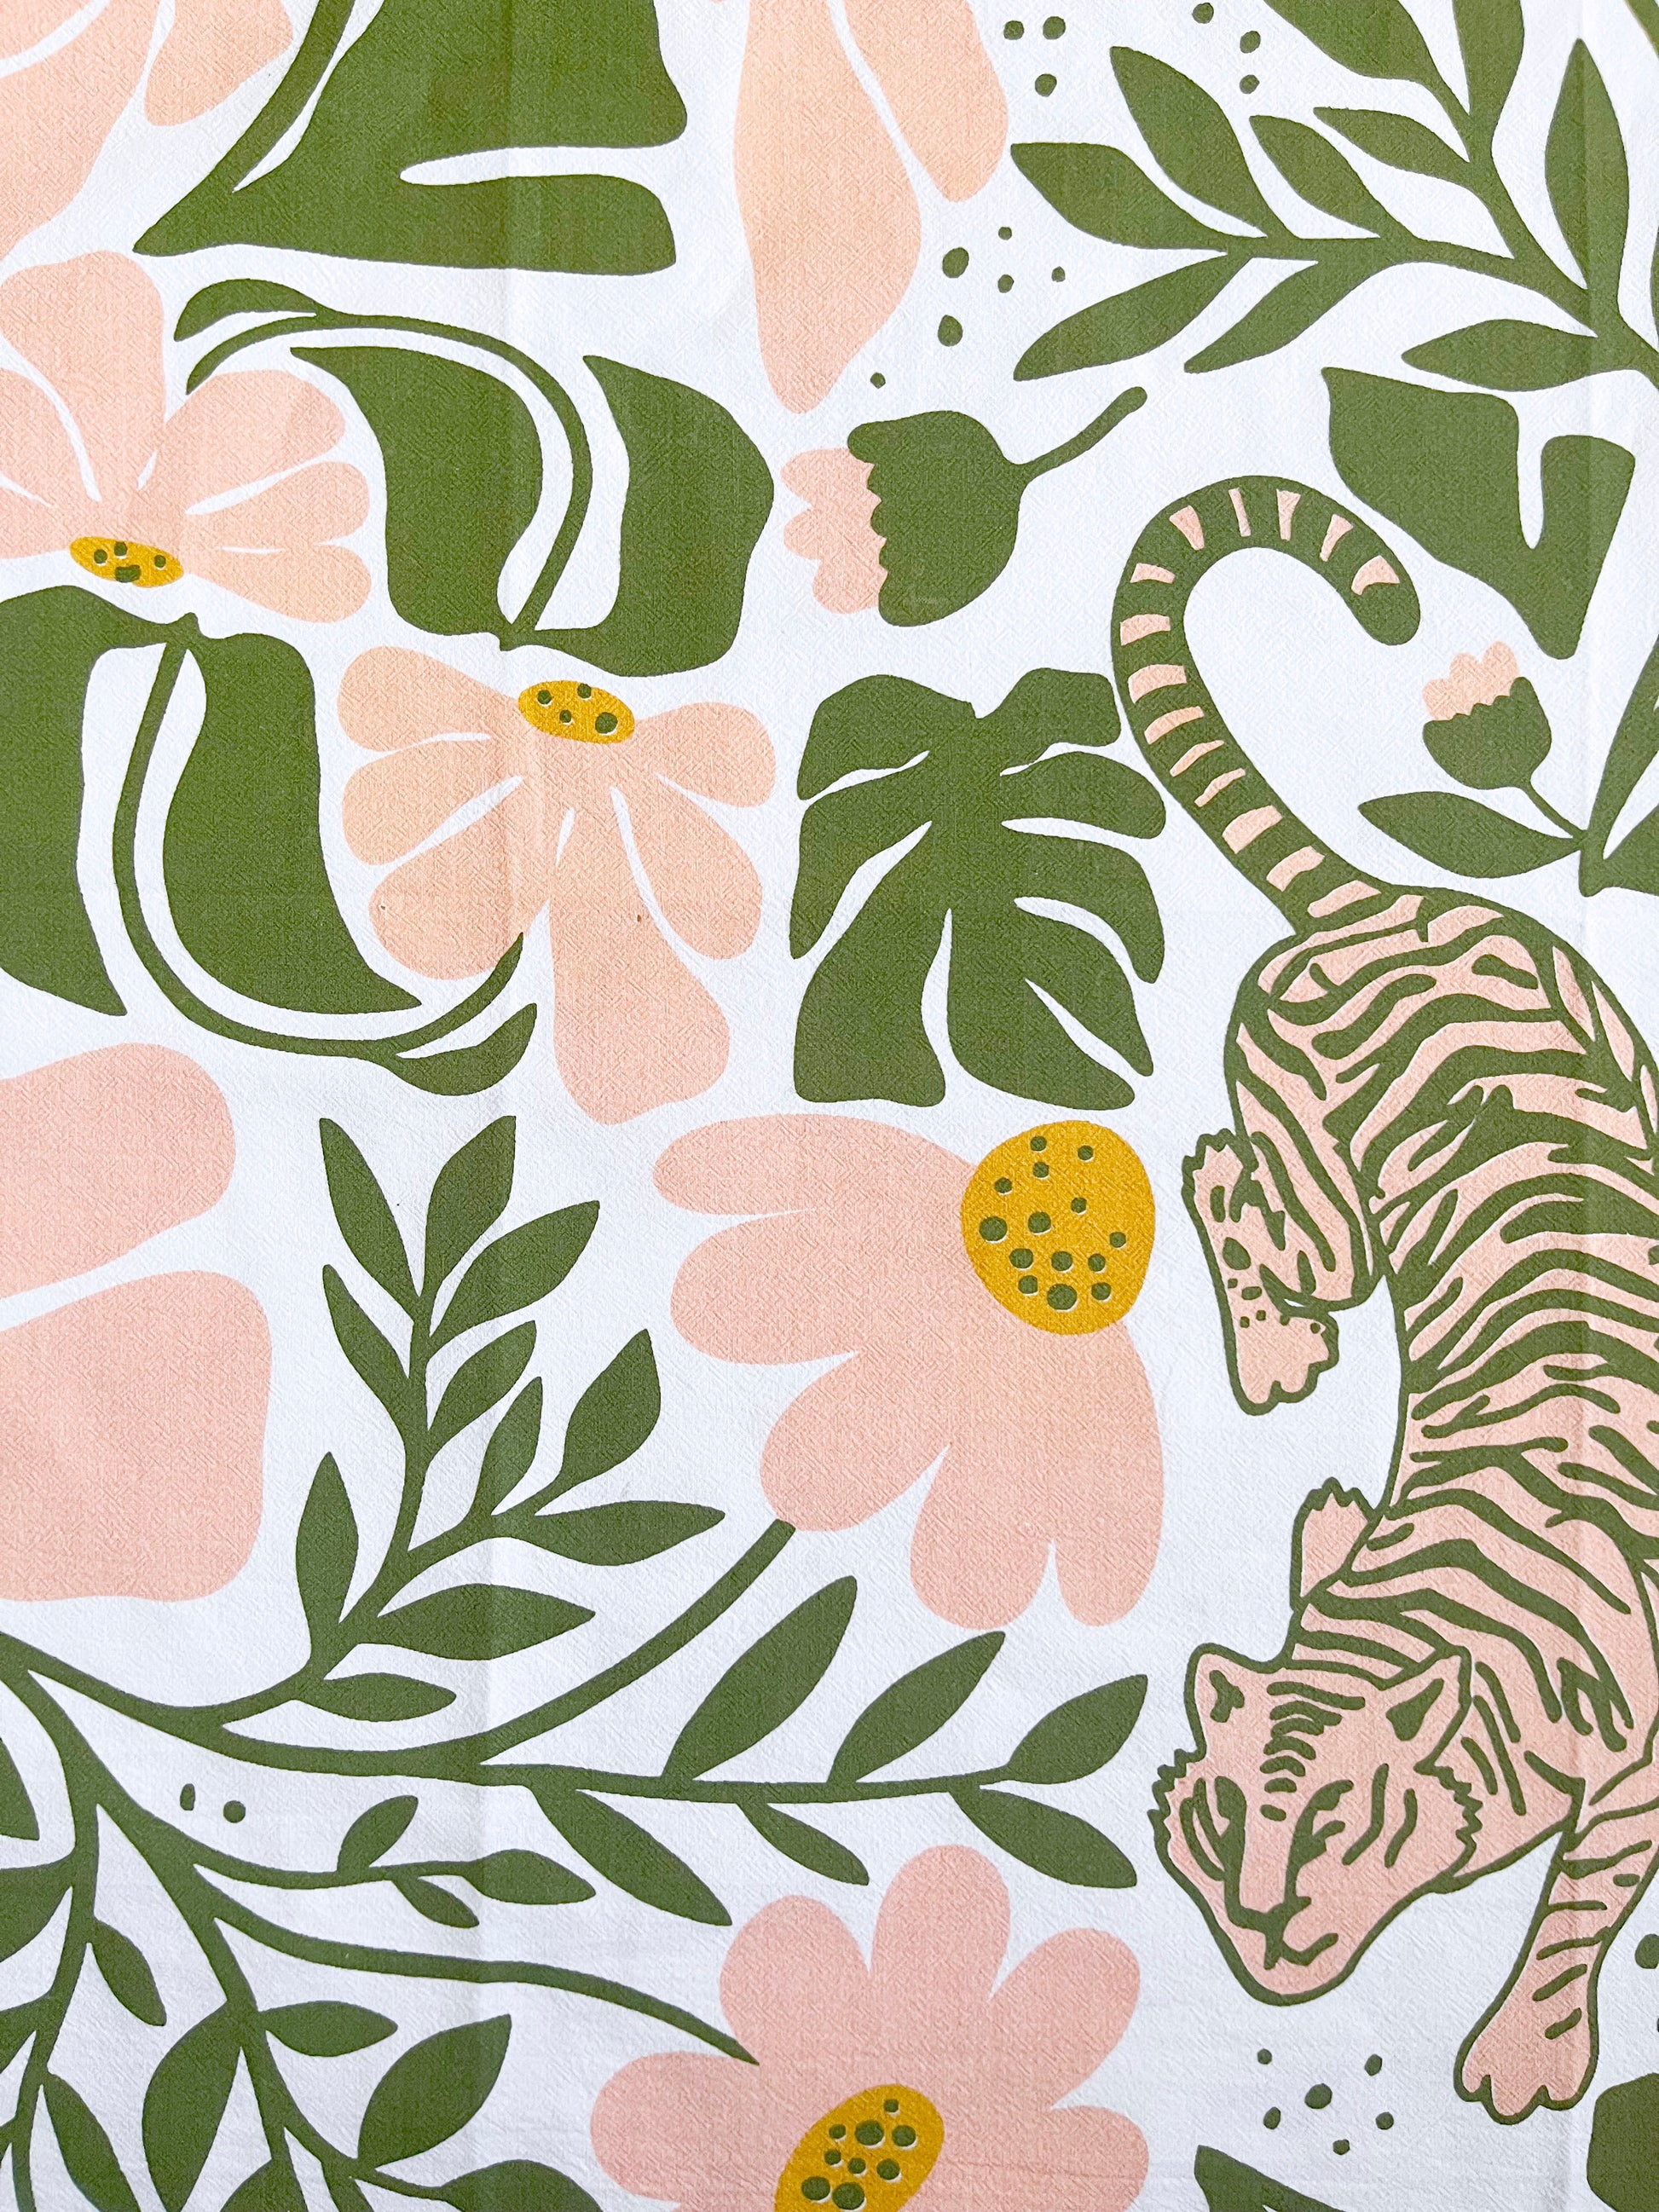 Modern tiger floral kitchen towel pink daisy mustard yellow green flowers maximalist home design cute kitchen dish towel gift for cat mom cat lover home gift housewarming wedding gift